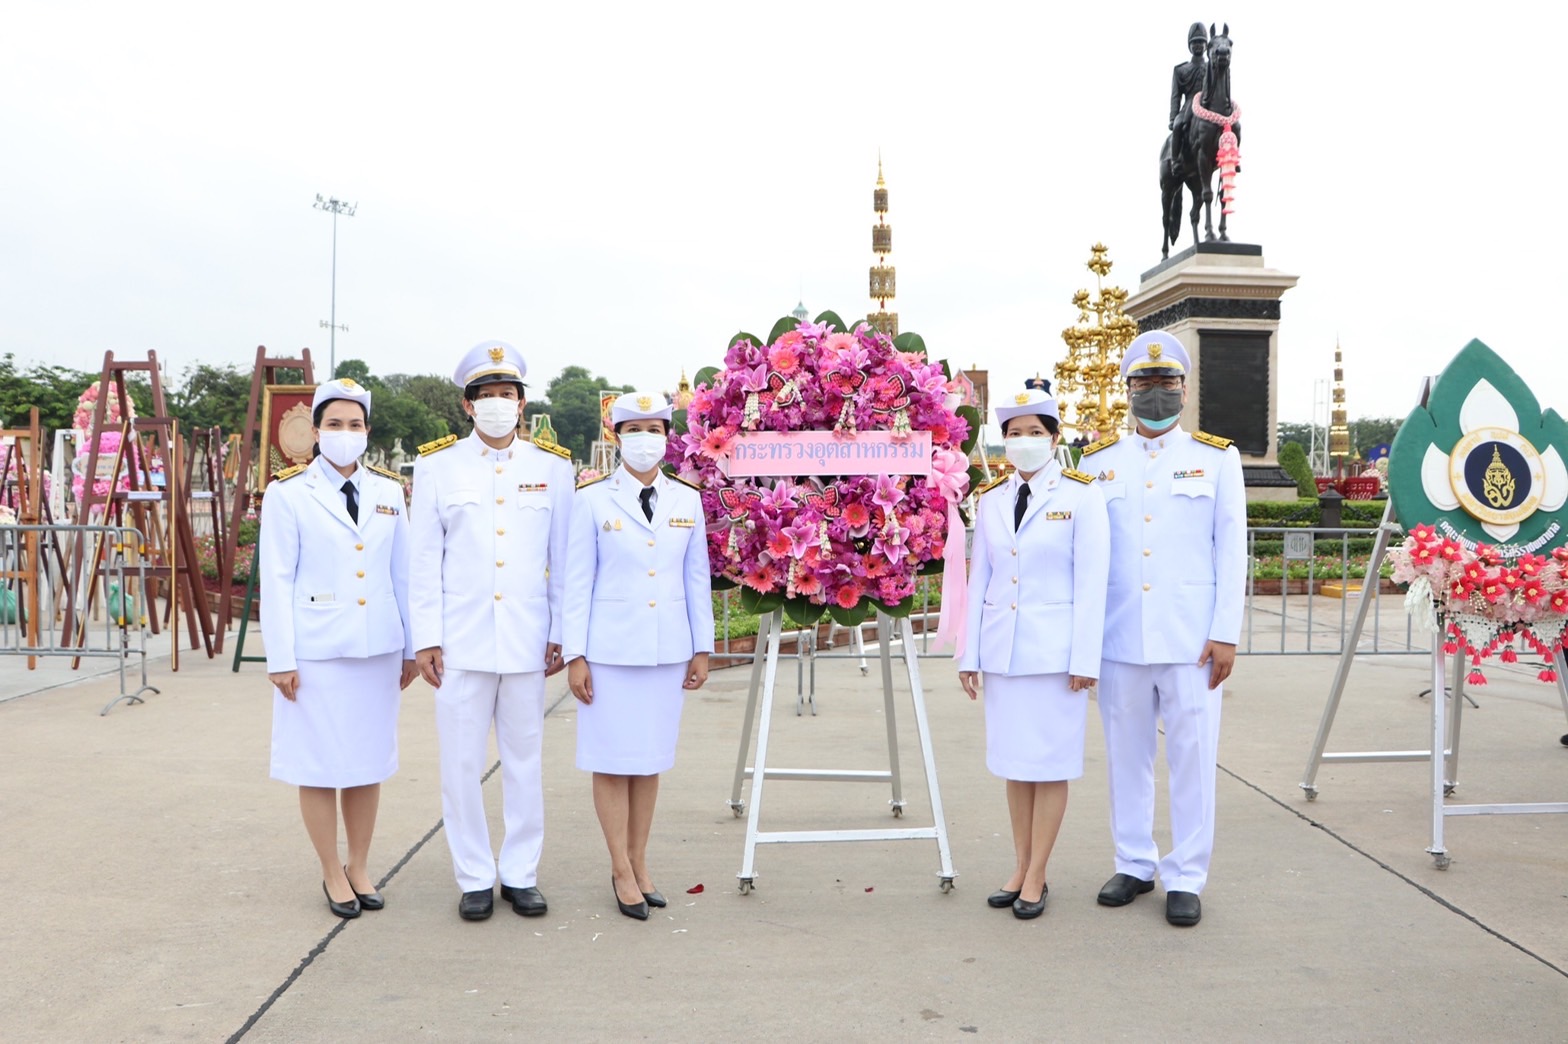 OIE as a Representative of the Ministry of Industry Laying Wreaths to Pay Homage to His Majesty King Chulalongkorn the Great (Rama V) on Piyamaharaj Day.